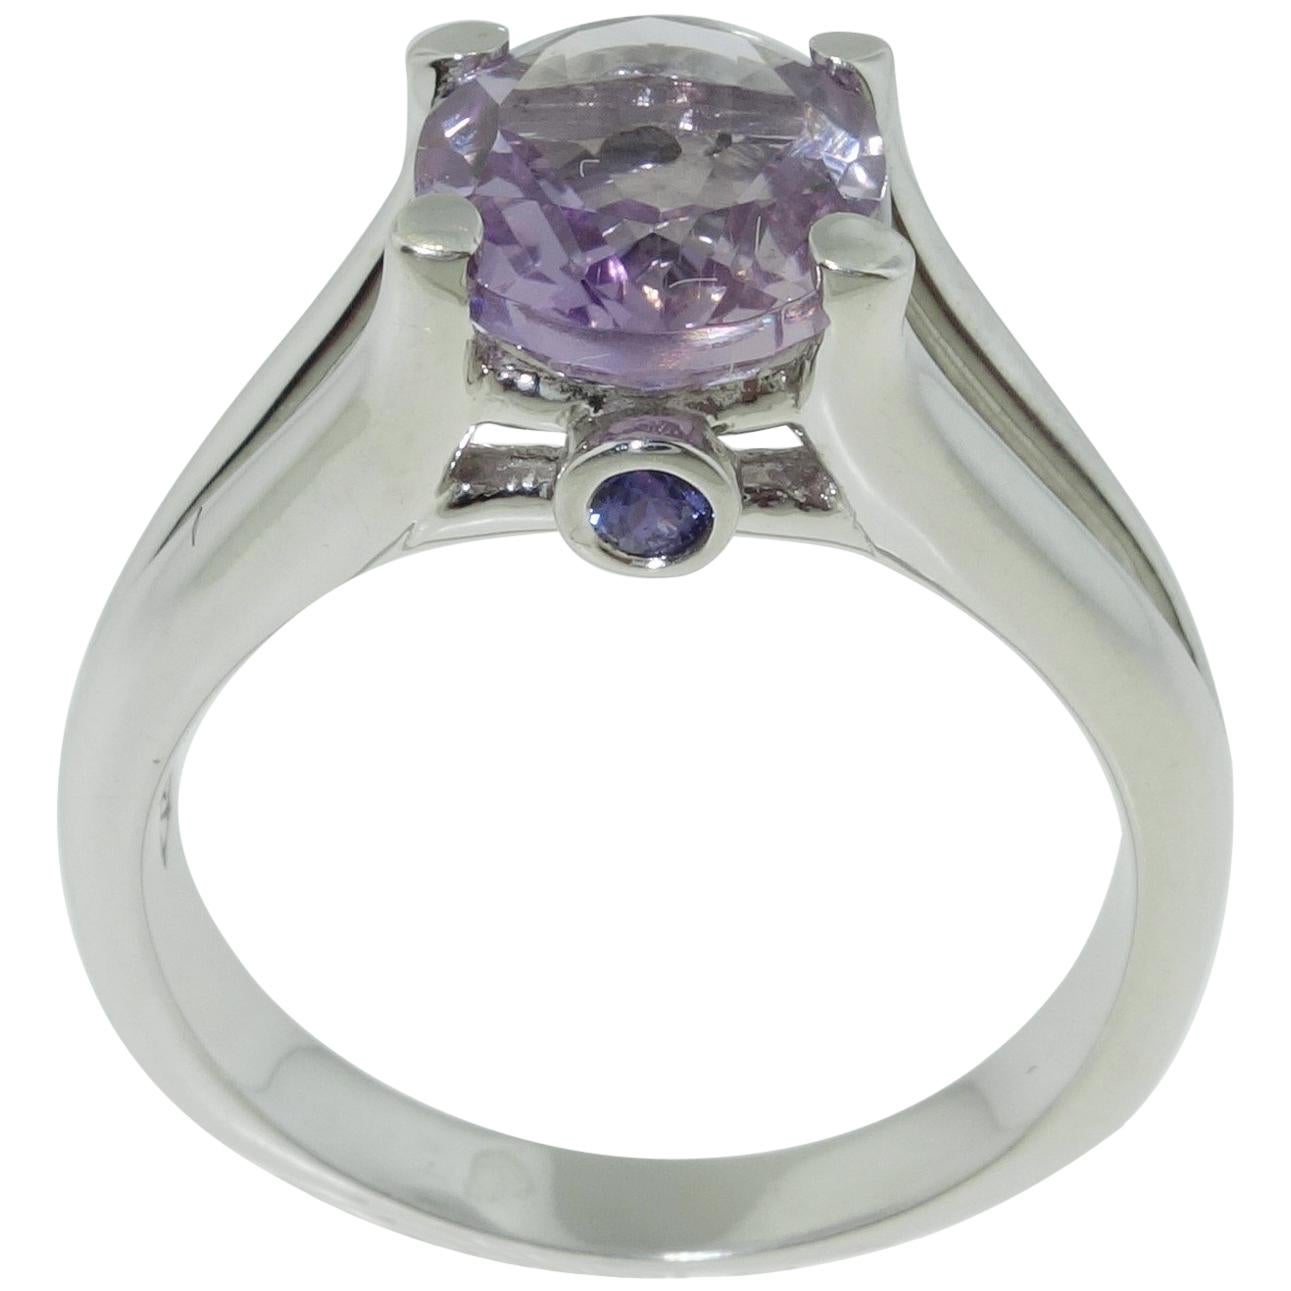 2.33 Carat Rose de France Amethyst and Sapphire Ring Estate Fine Jewelry For Sale